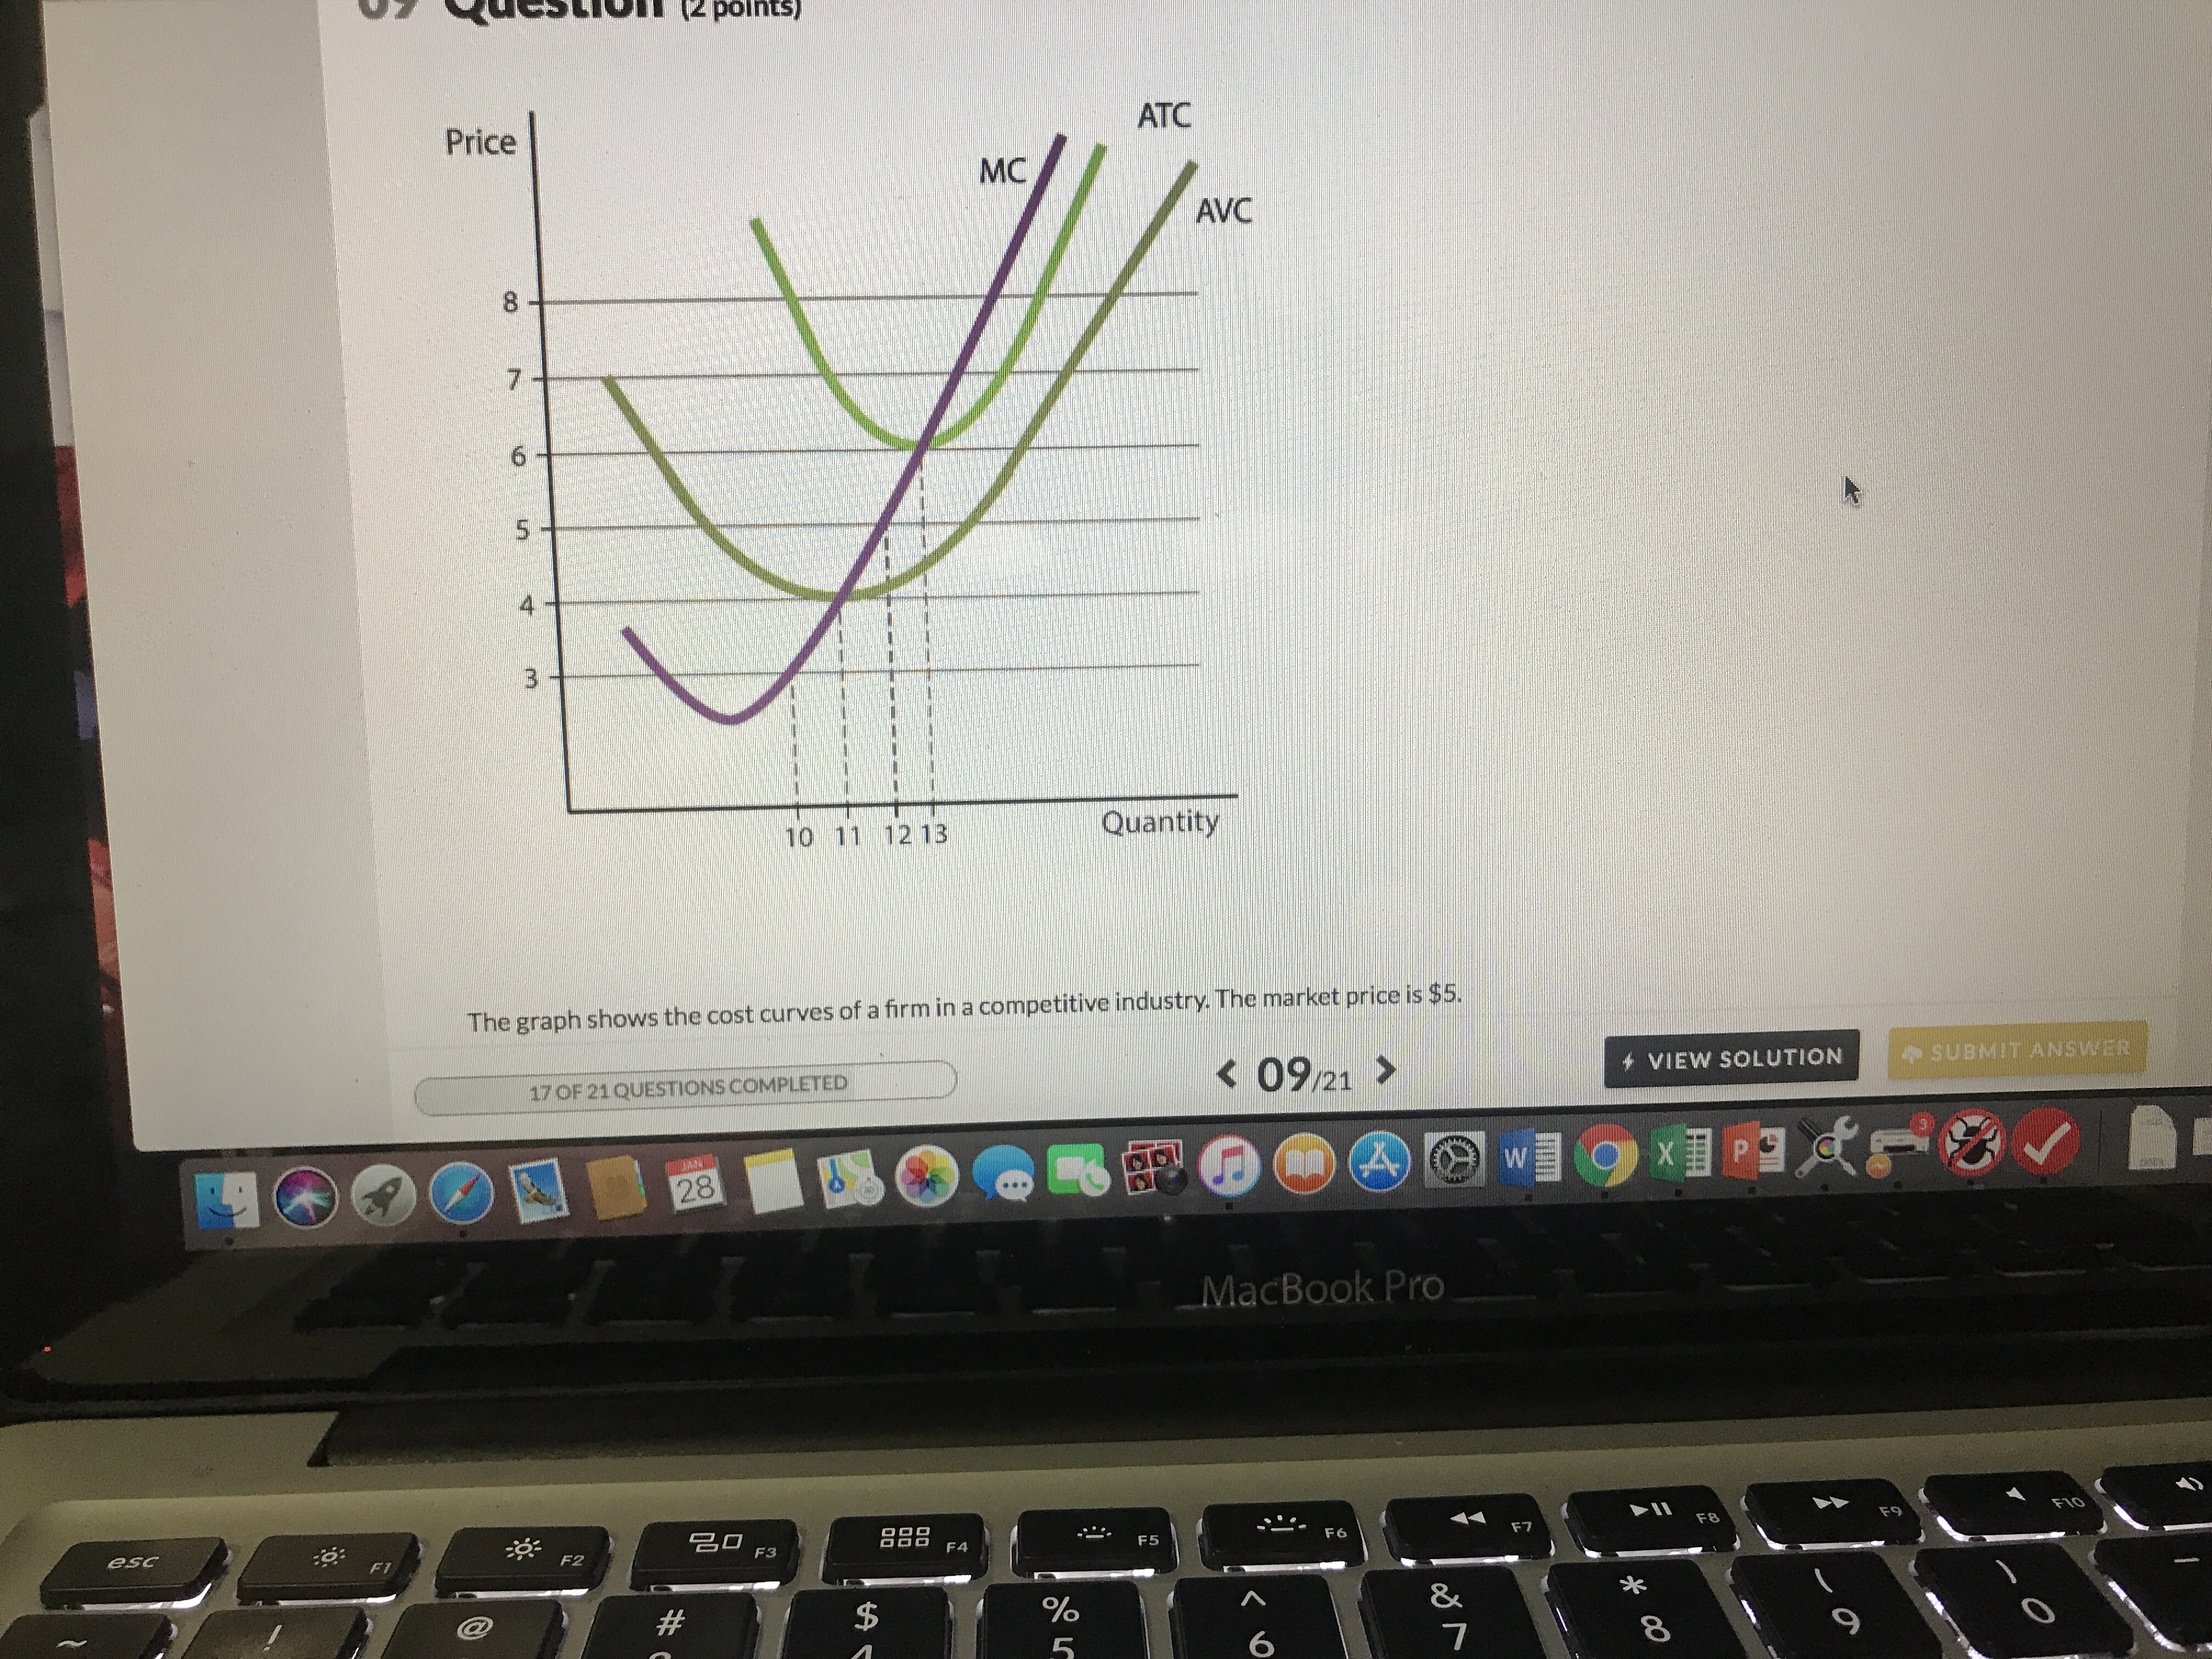 Price
ATC
MC
AVC
8
4
10 11 12 13
Quantity
The graph shows the cost curves of a firm in a competitive industry. The market price is $5.
K09/21
VIEW SOLUTION
SUBMIT ANSWER
17 OF 21QUESTIONS COMPLETED
28
MacBook Pro
名□ F3
esc
:O
F7
F8
F9
F2
8%
7
6
